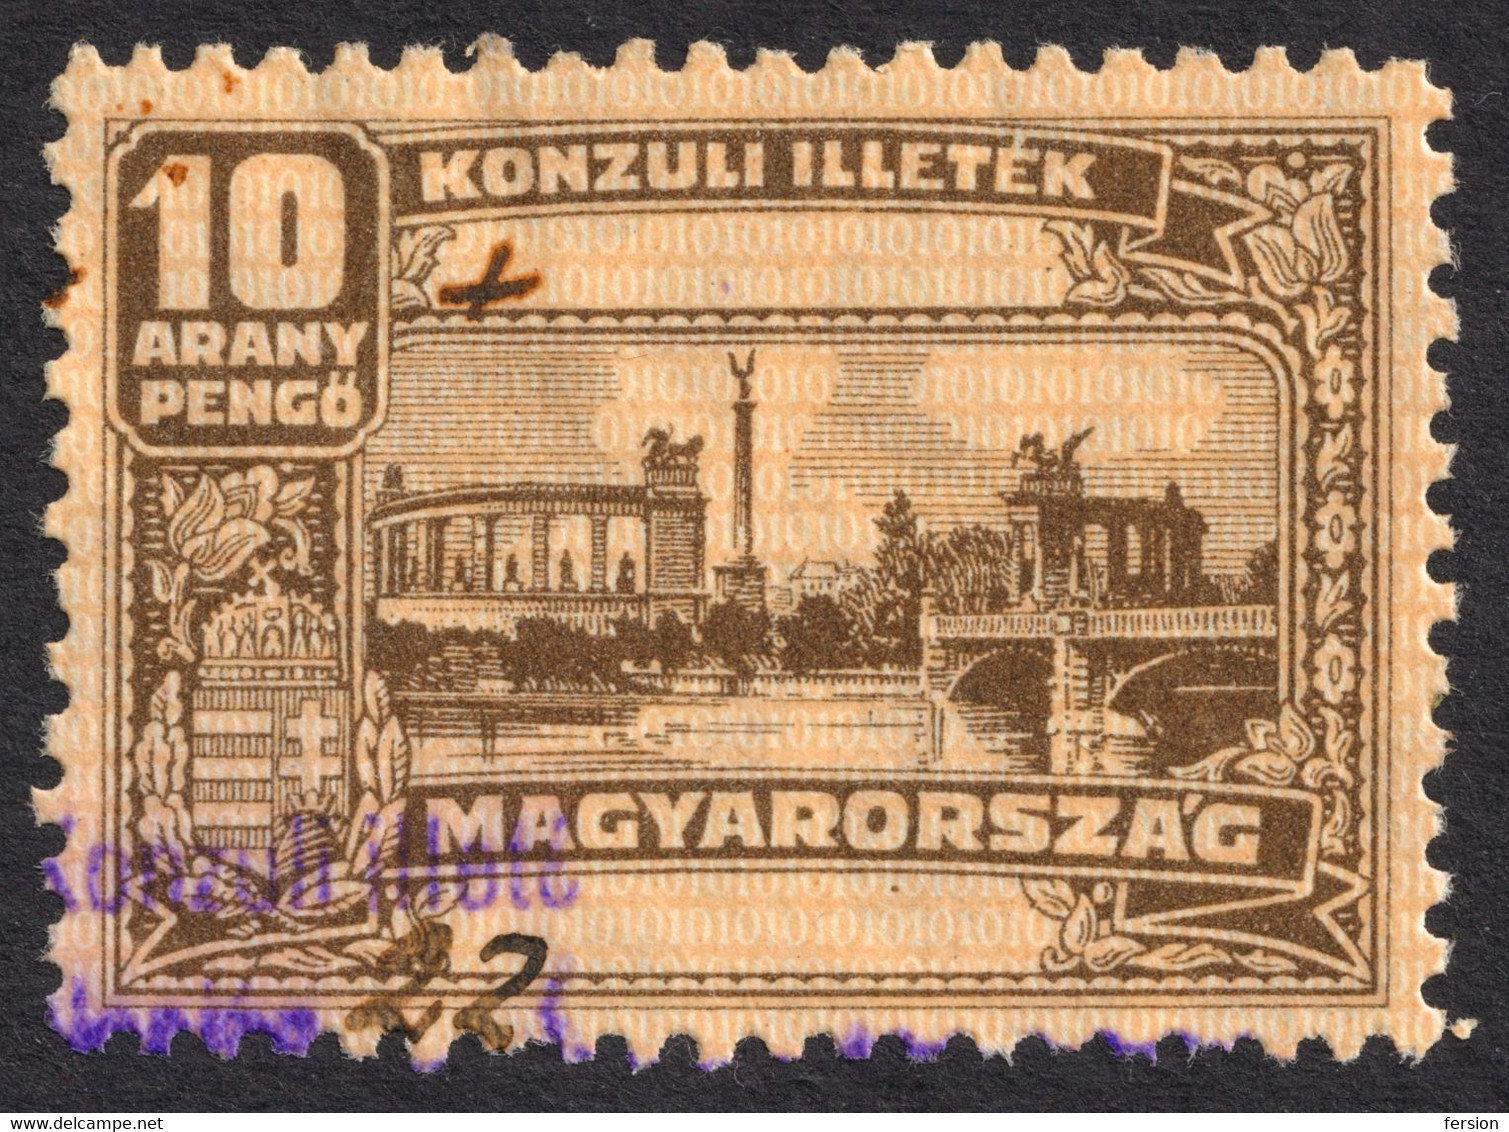 1931 - 1936 Hungary Ungarn Hongrie - Consular Revenue Tax Stamp - 10 A.P - Heroes' Square BUDAPEST Monument - Fiscales